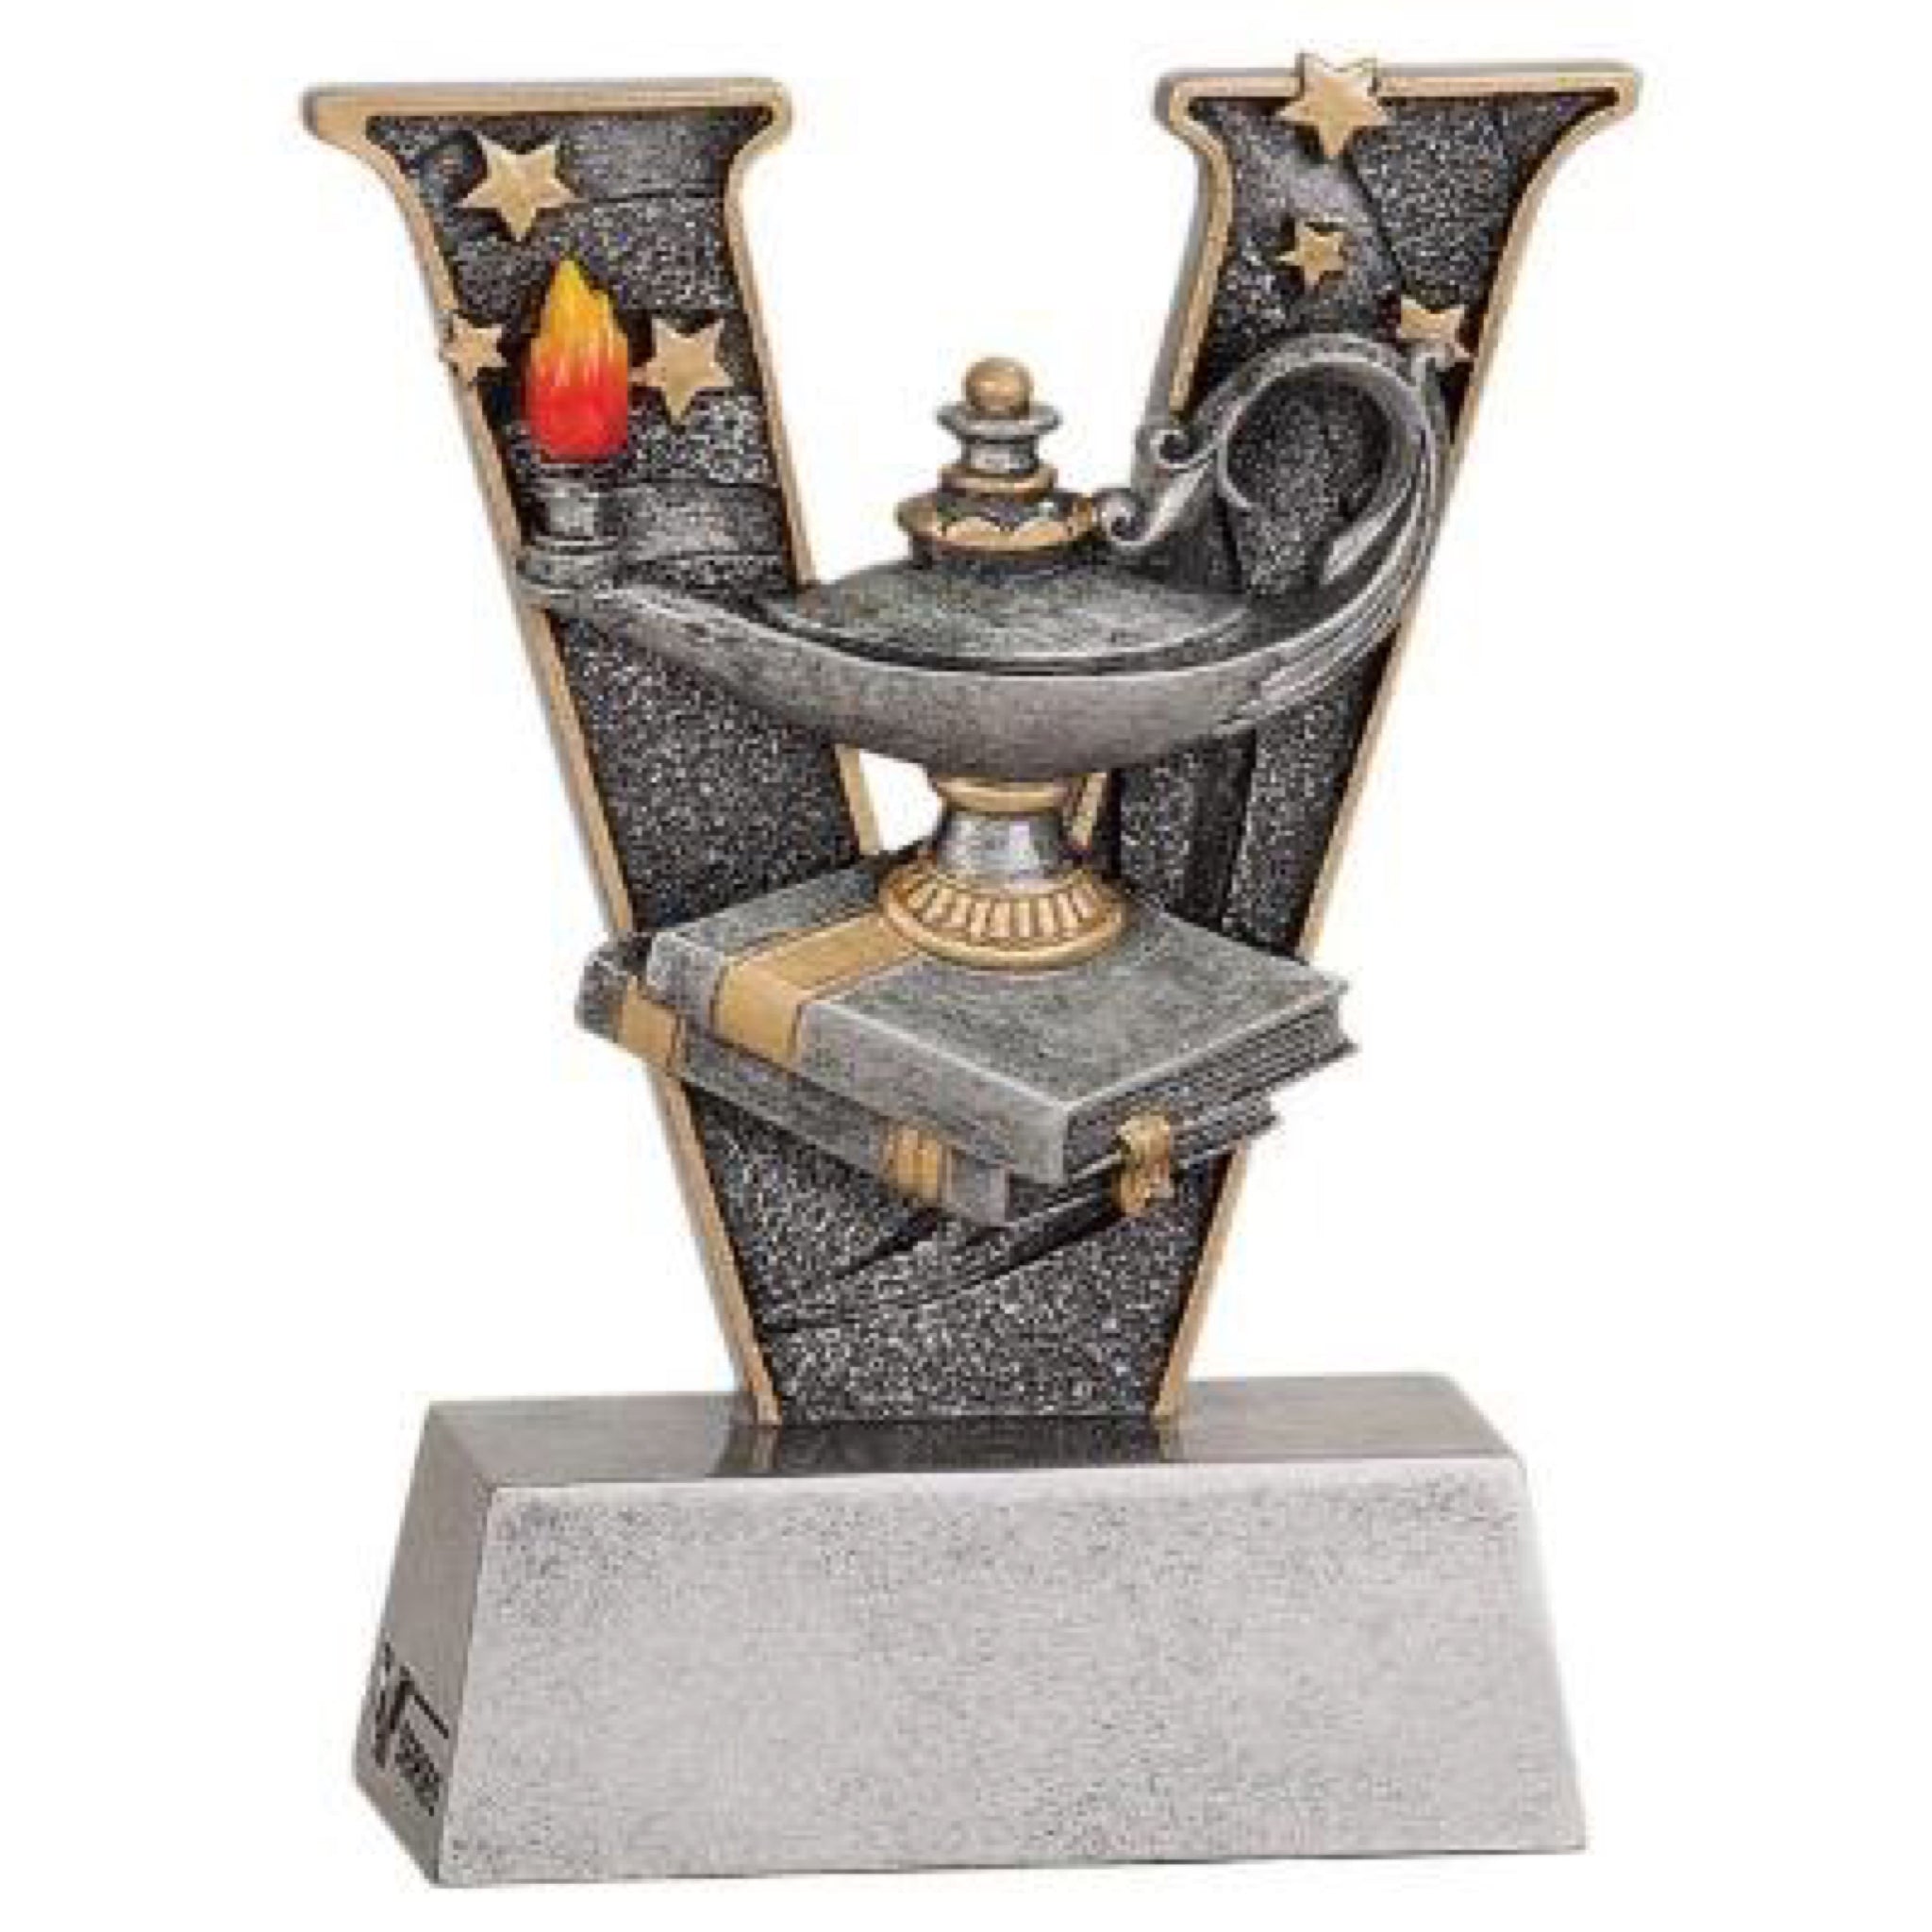 Letter "V" shape trophy featuring a lamp of knowledge sitting on two books.